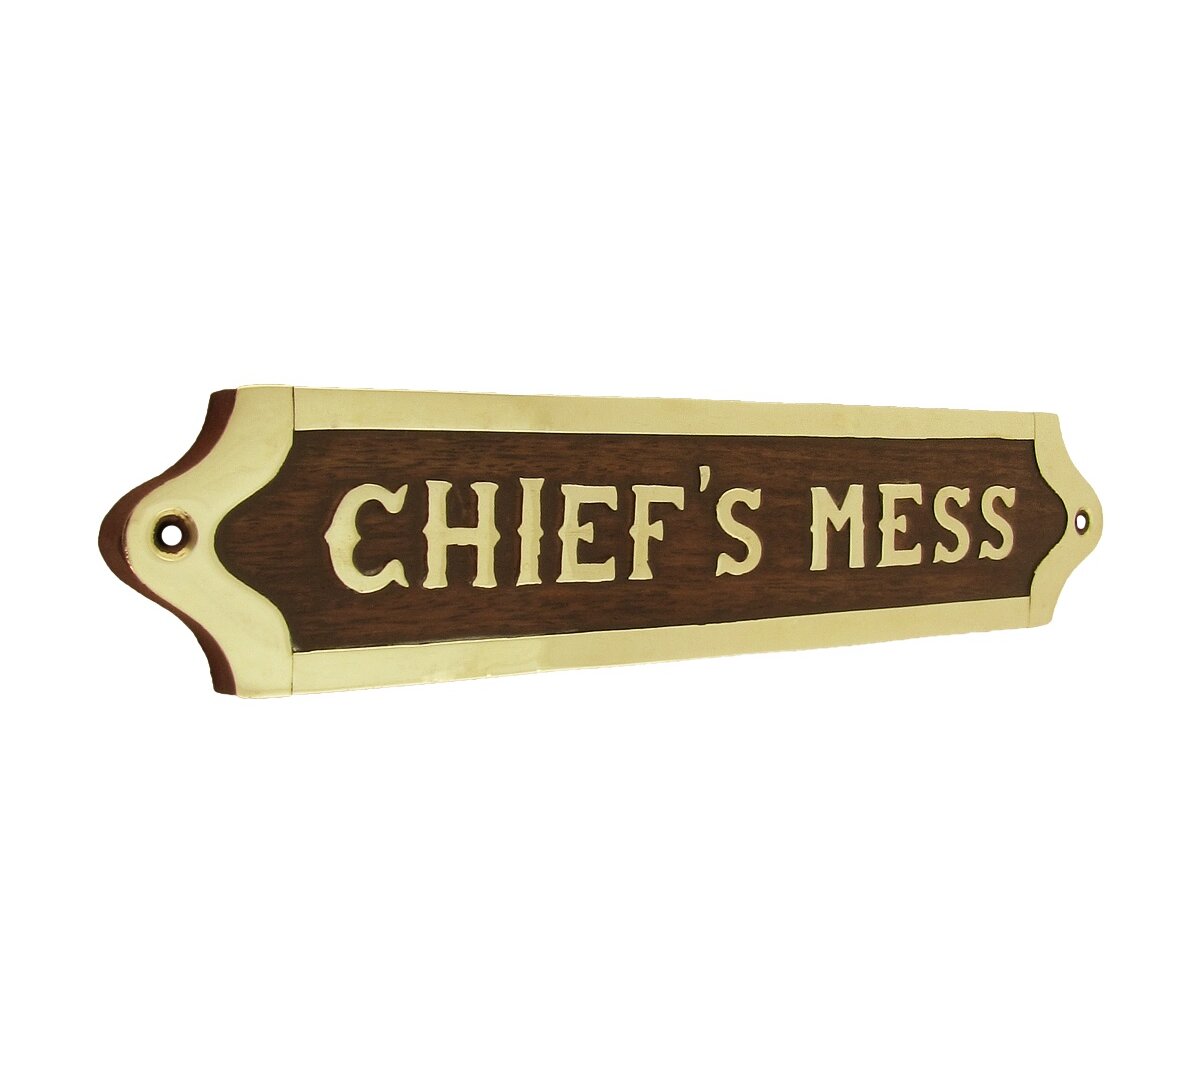 Chiefs Mess Brass Door Sign Maritime Ships Plaque Ship Wall Decor US Navy Gift for sale online